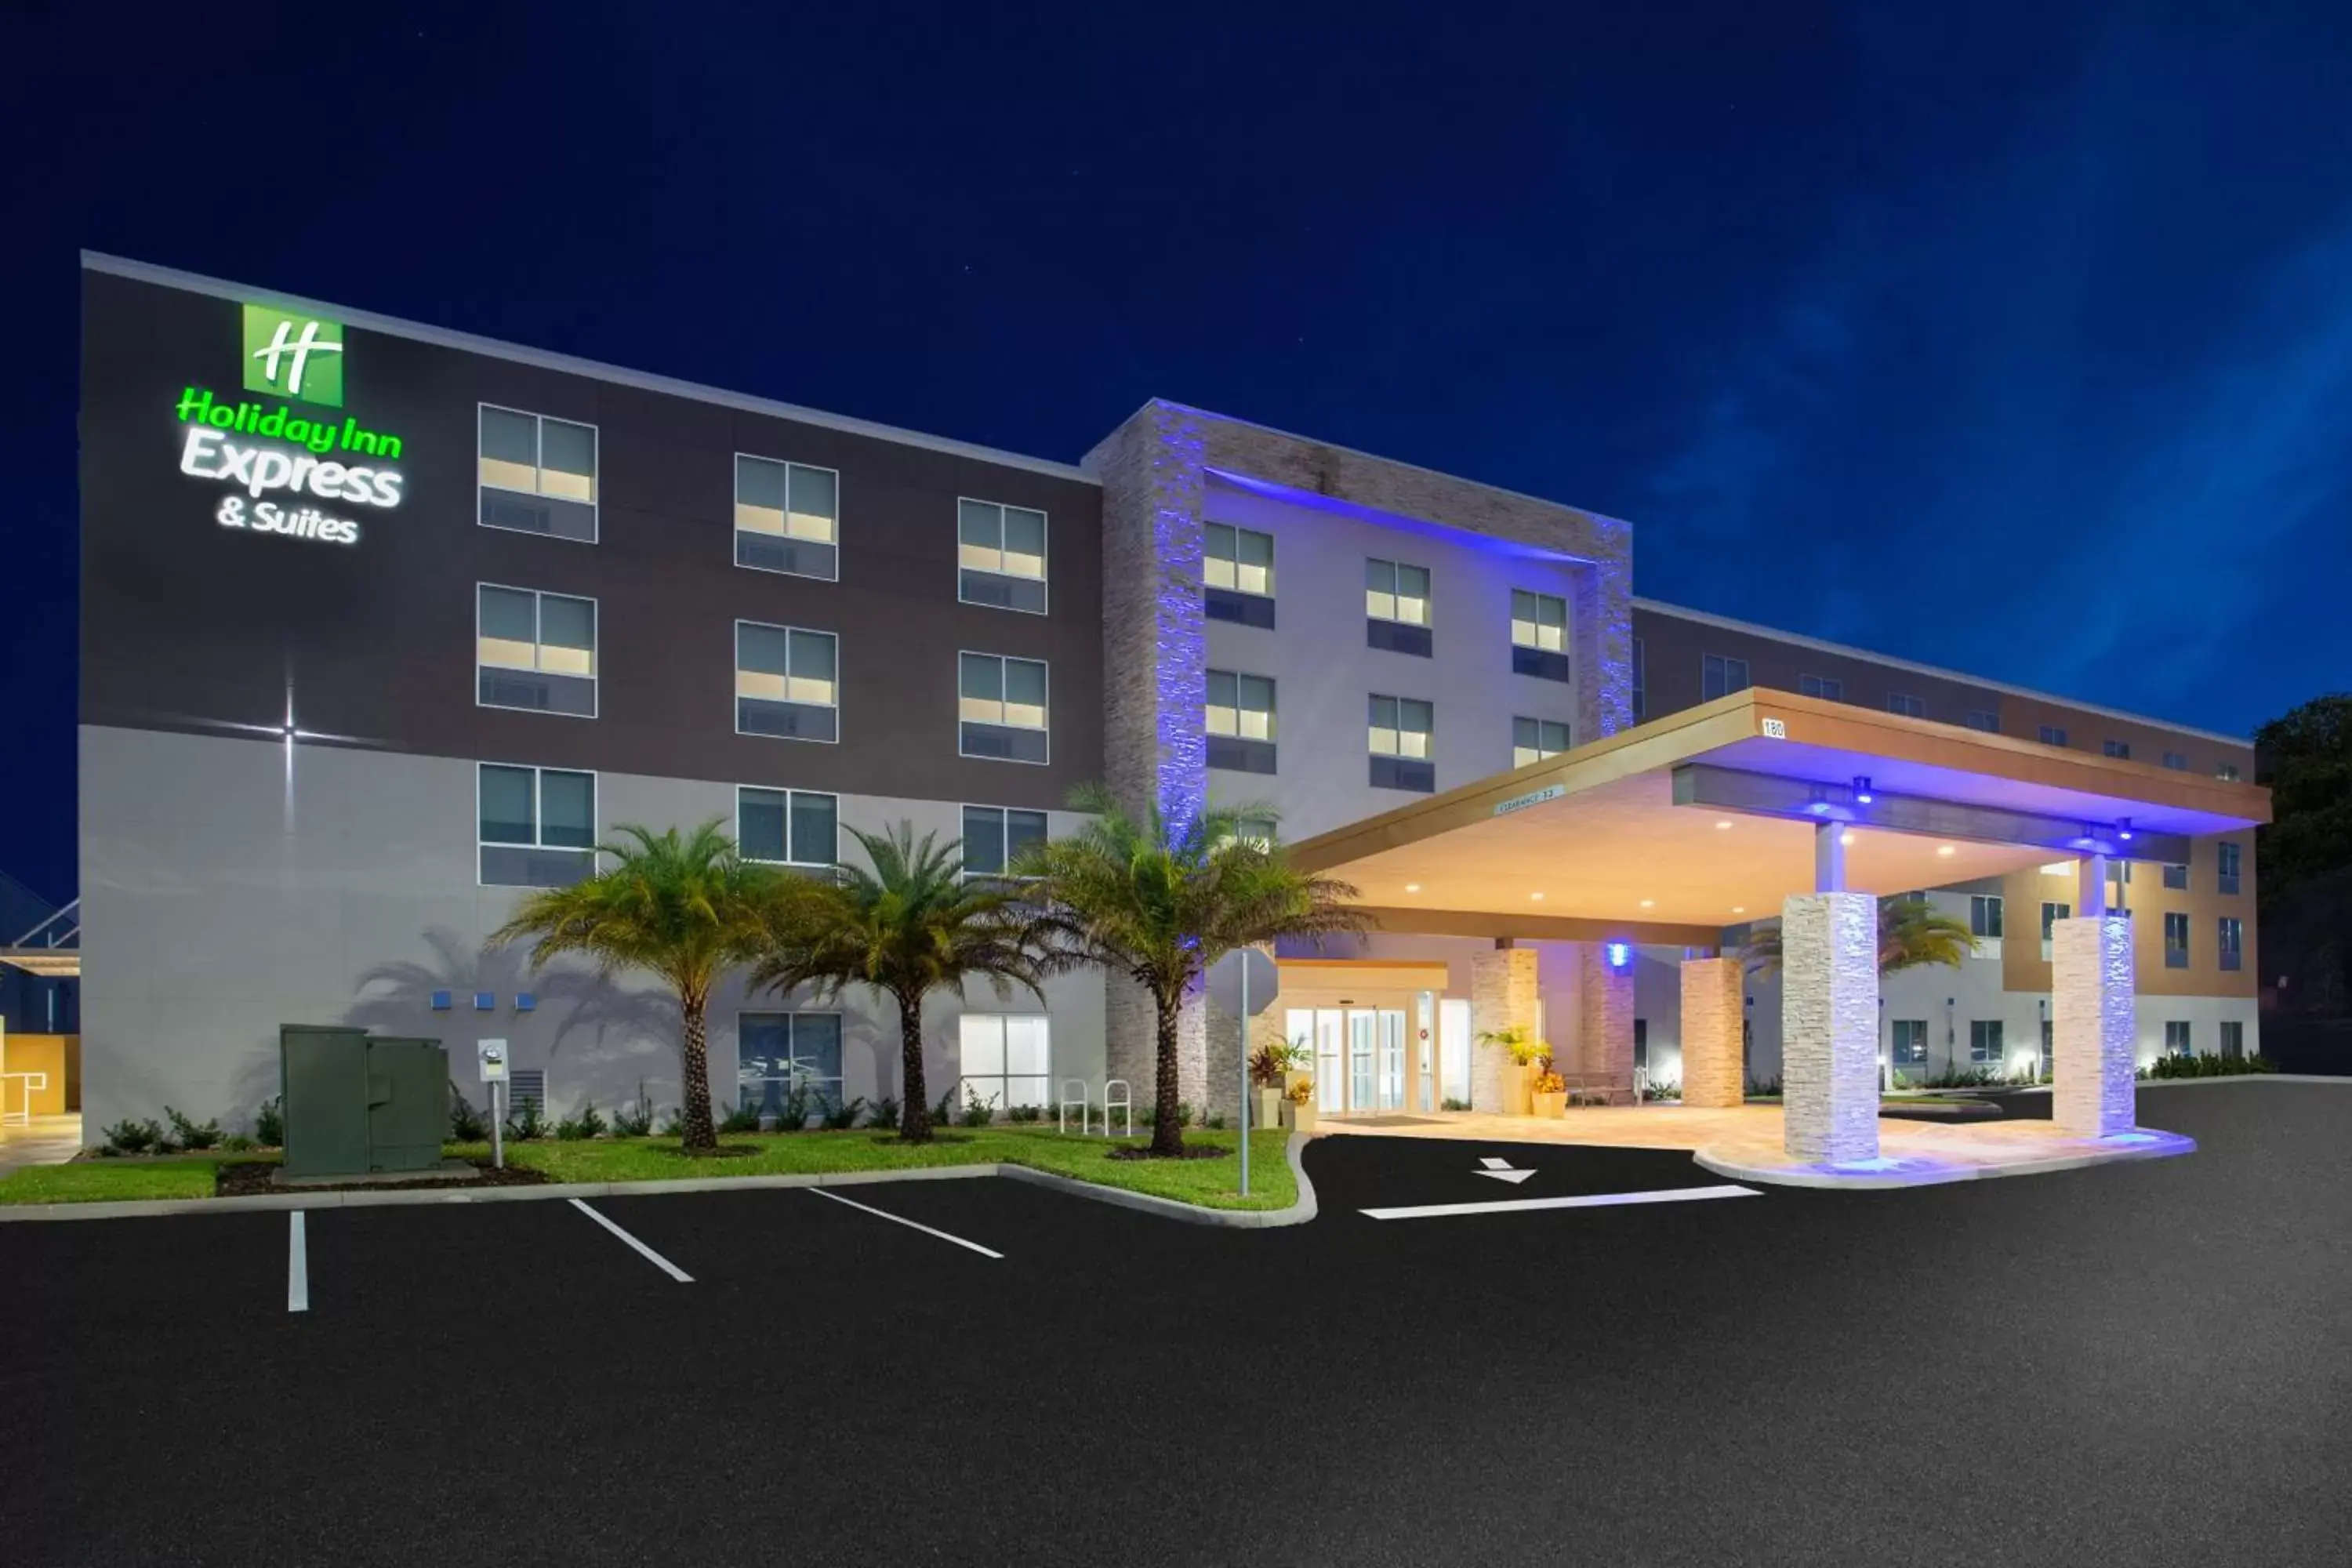 Property building in Holiday Inn Express & Suites - Deland South, an IHG Hotel